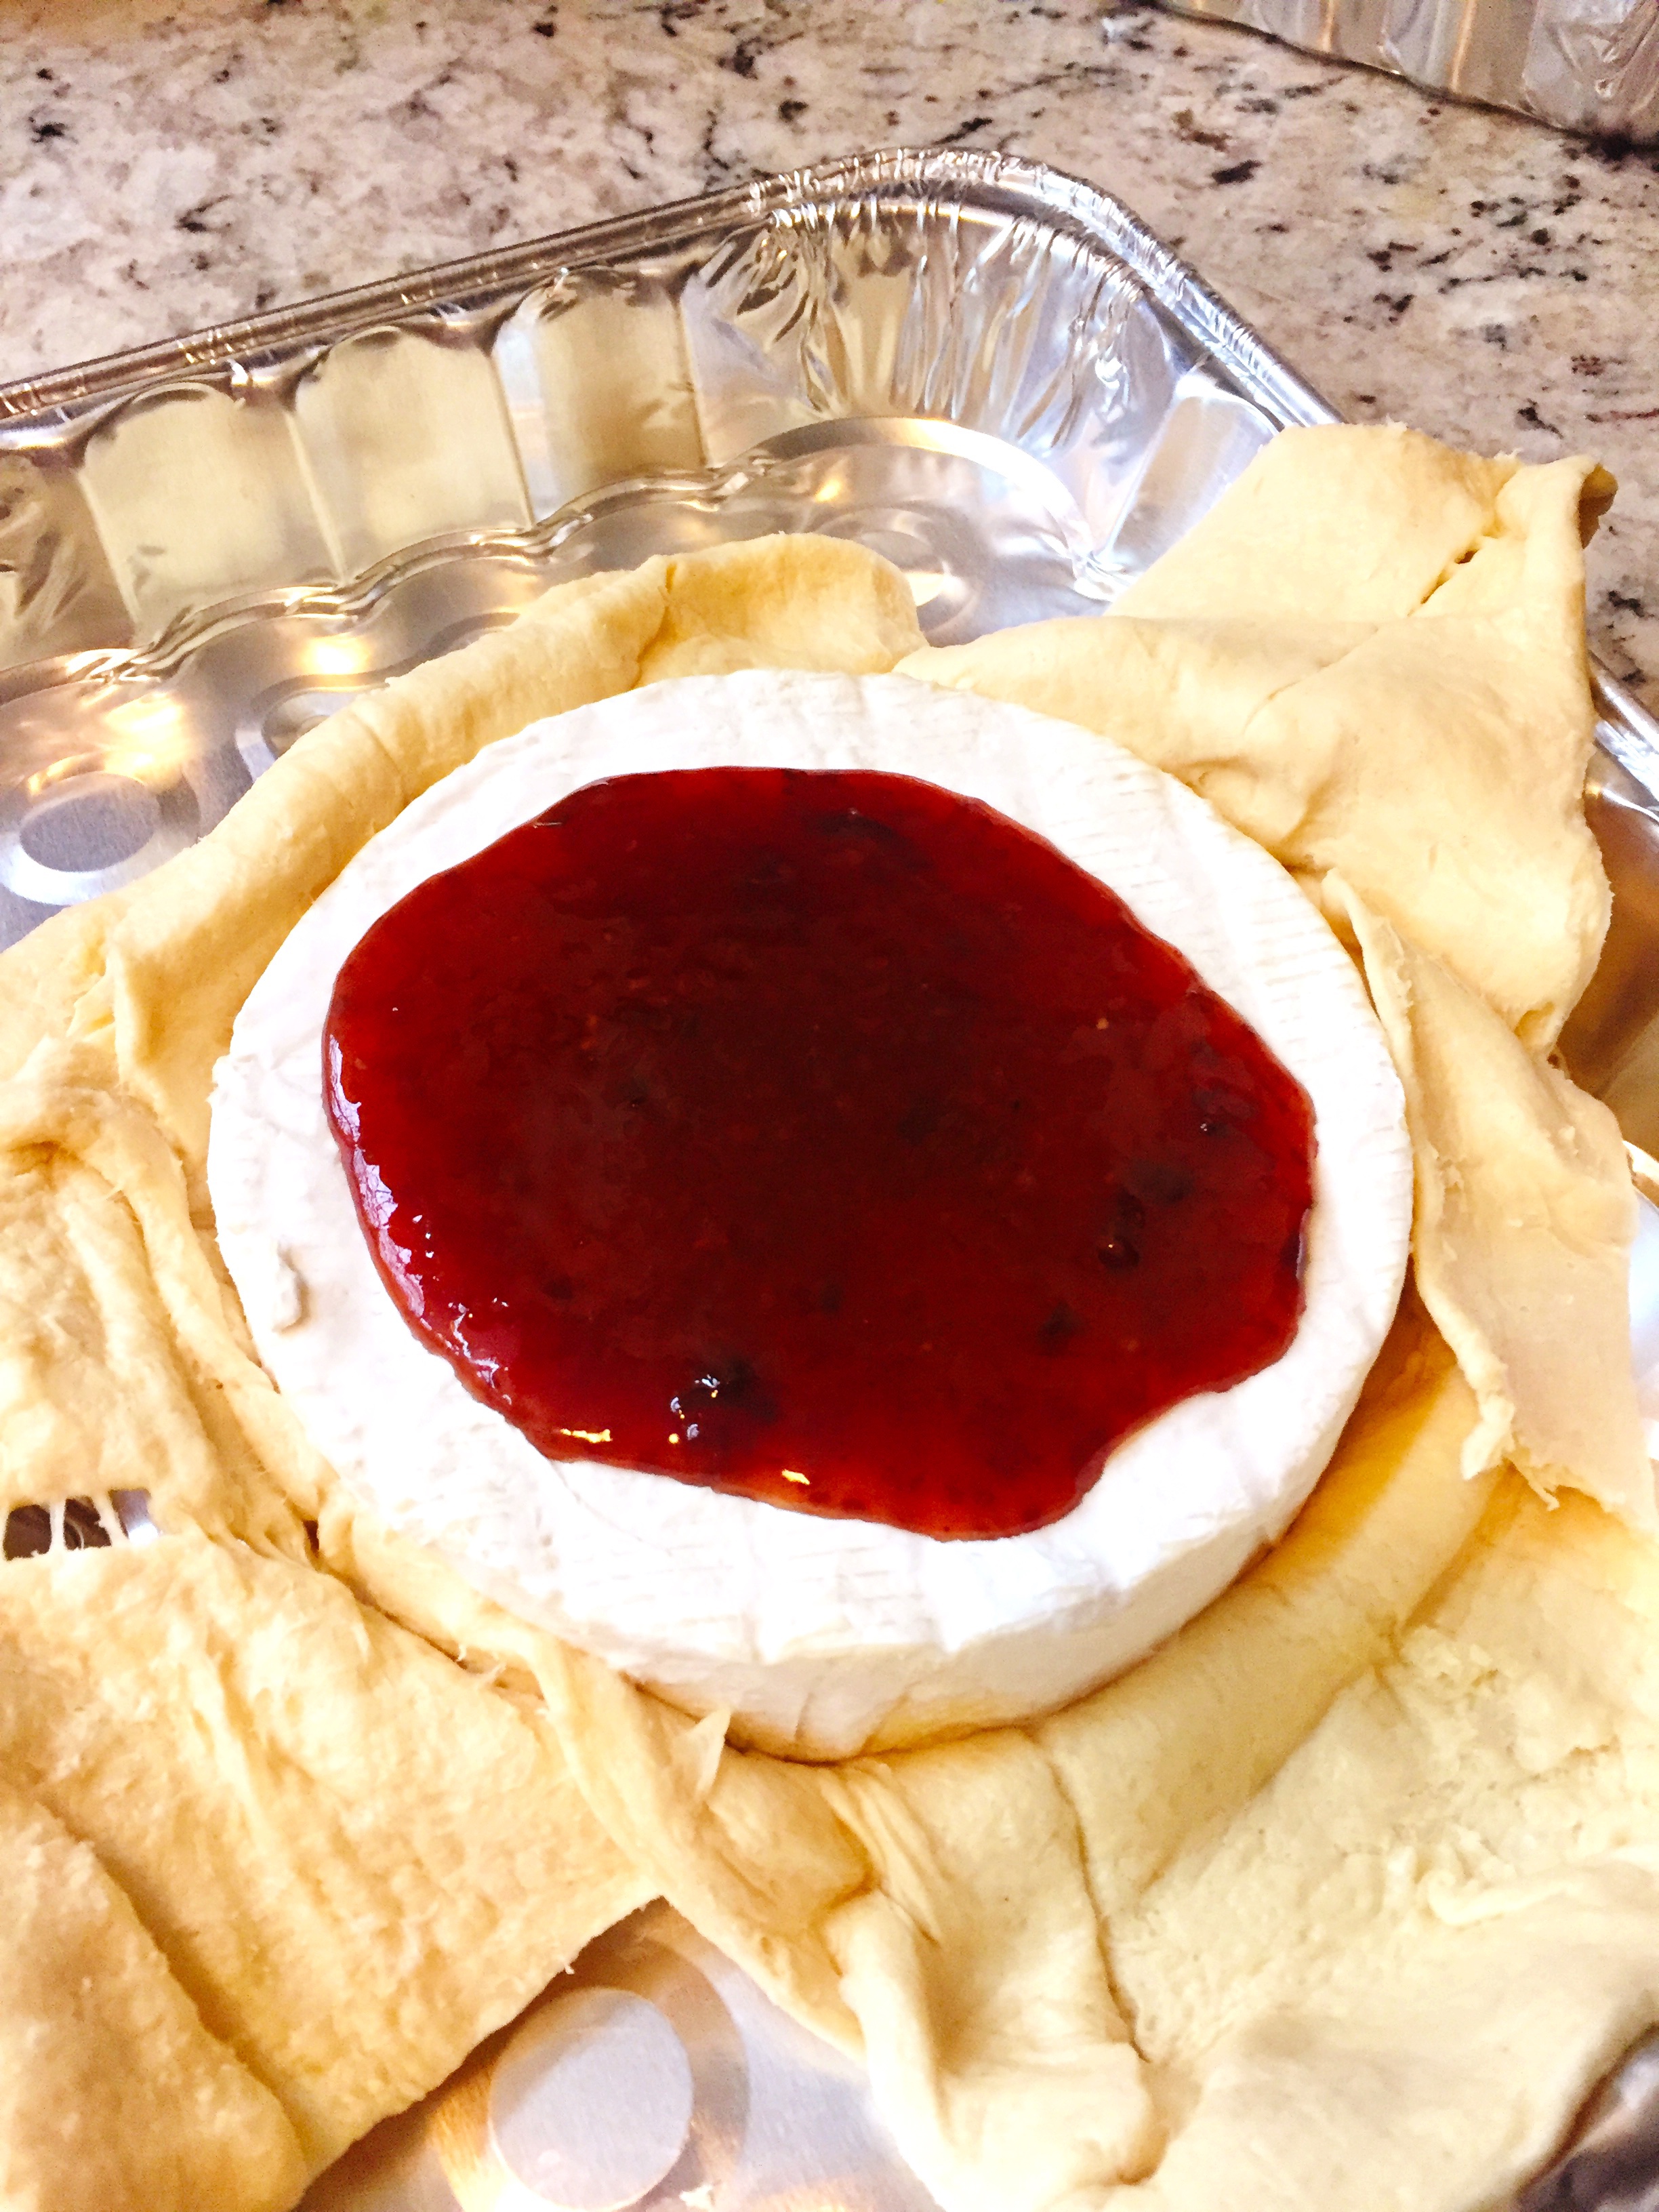 Raspberry Baked Brie assembly process